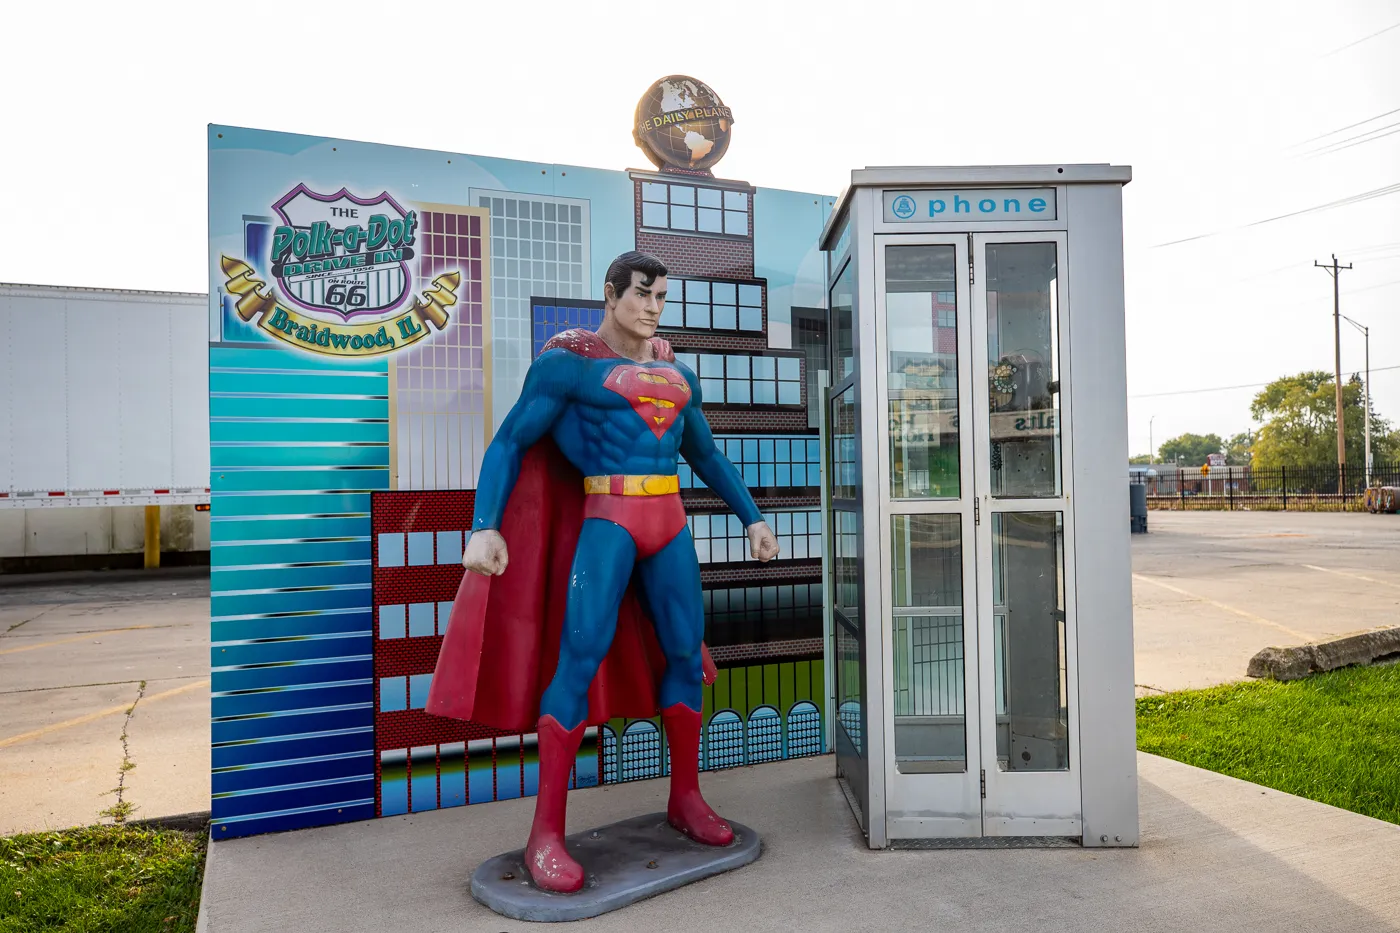 Superman and phone booth photo op at  the Route 66 Polk-a-Dot Drive In in Braidwood, Illinois